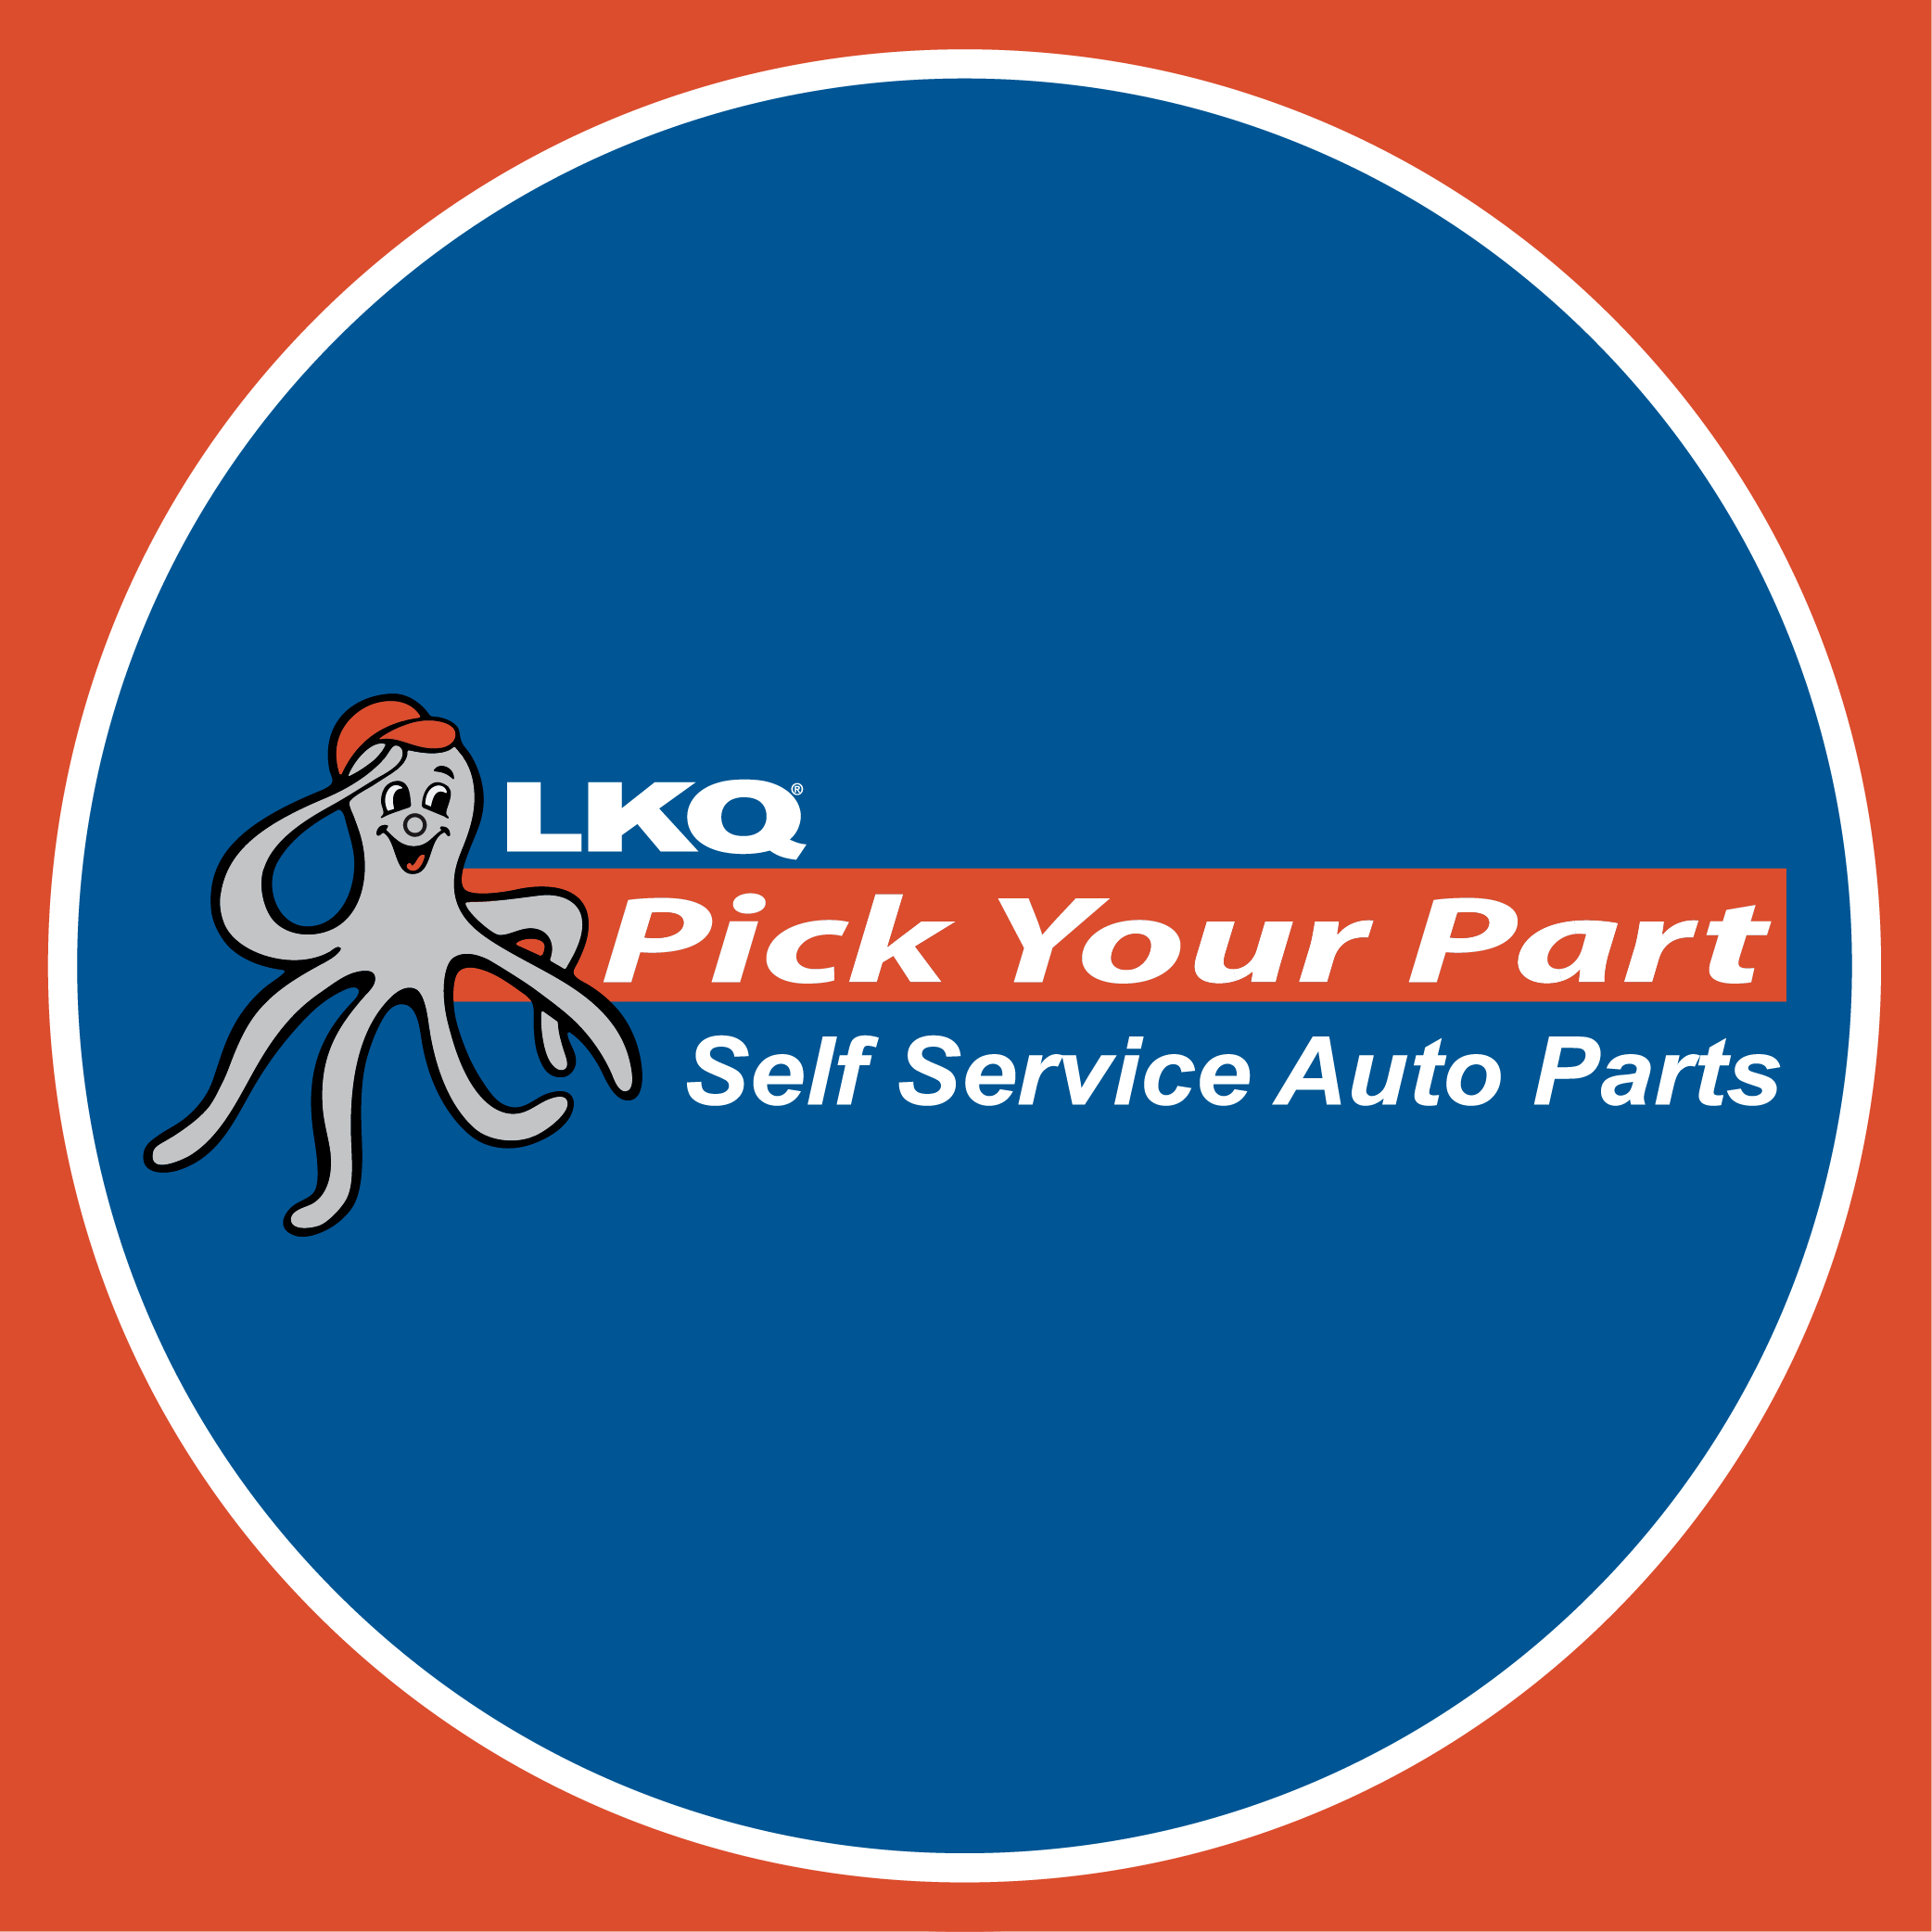 LKQ Pick Your Part Logo featuring the Pick Your Part Octopus.